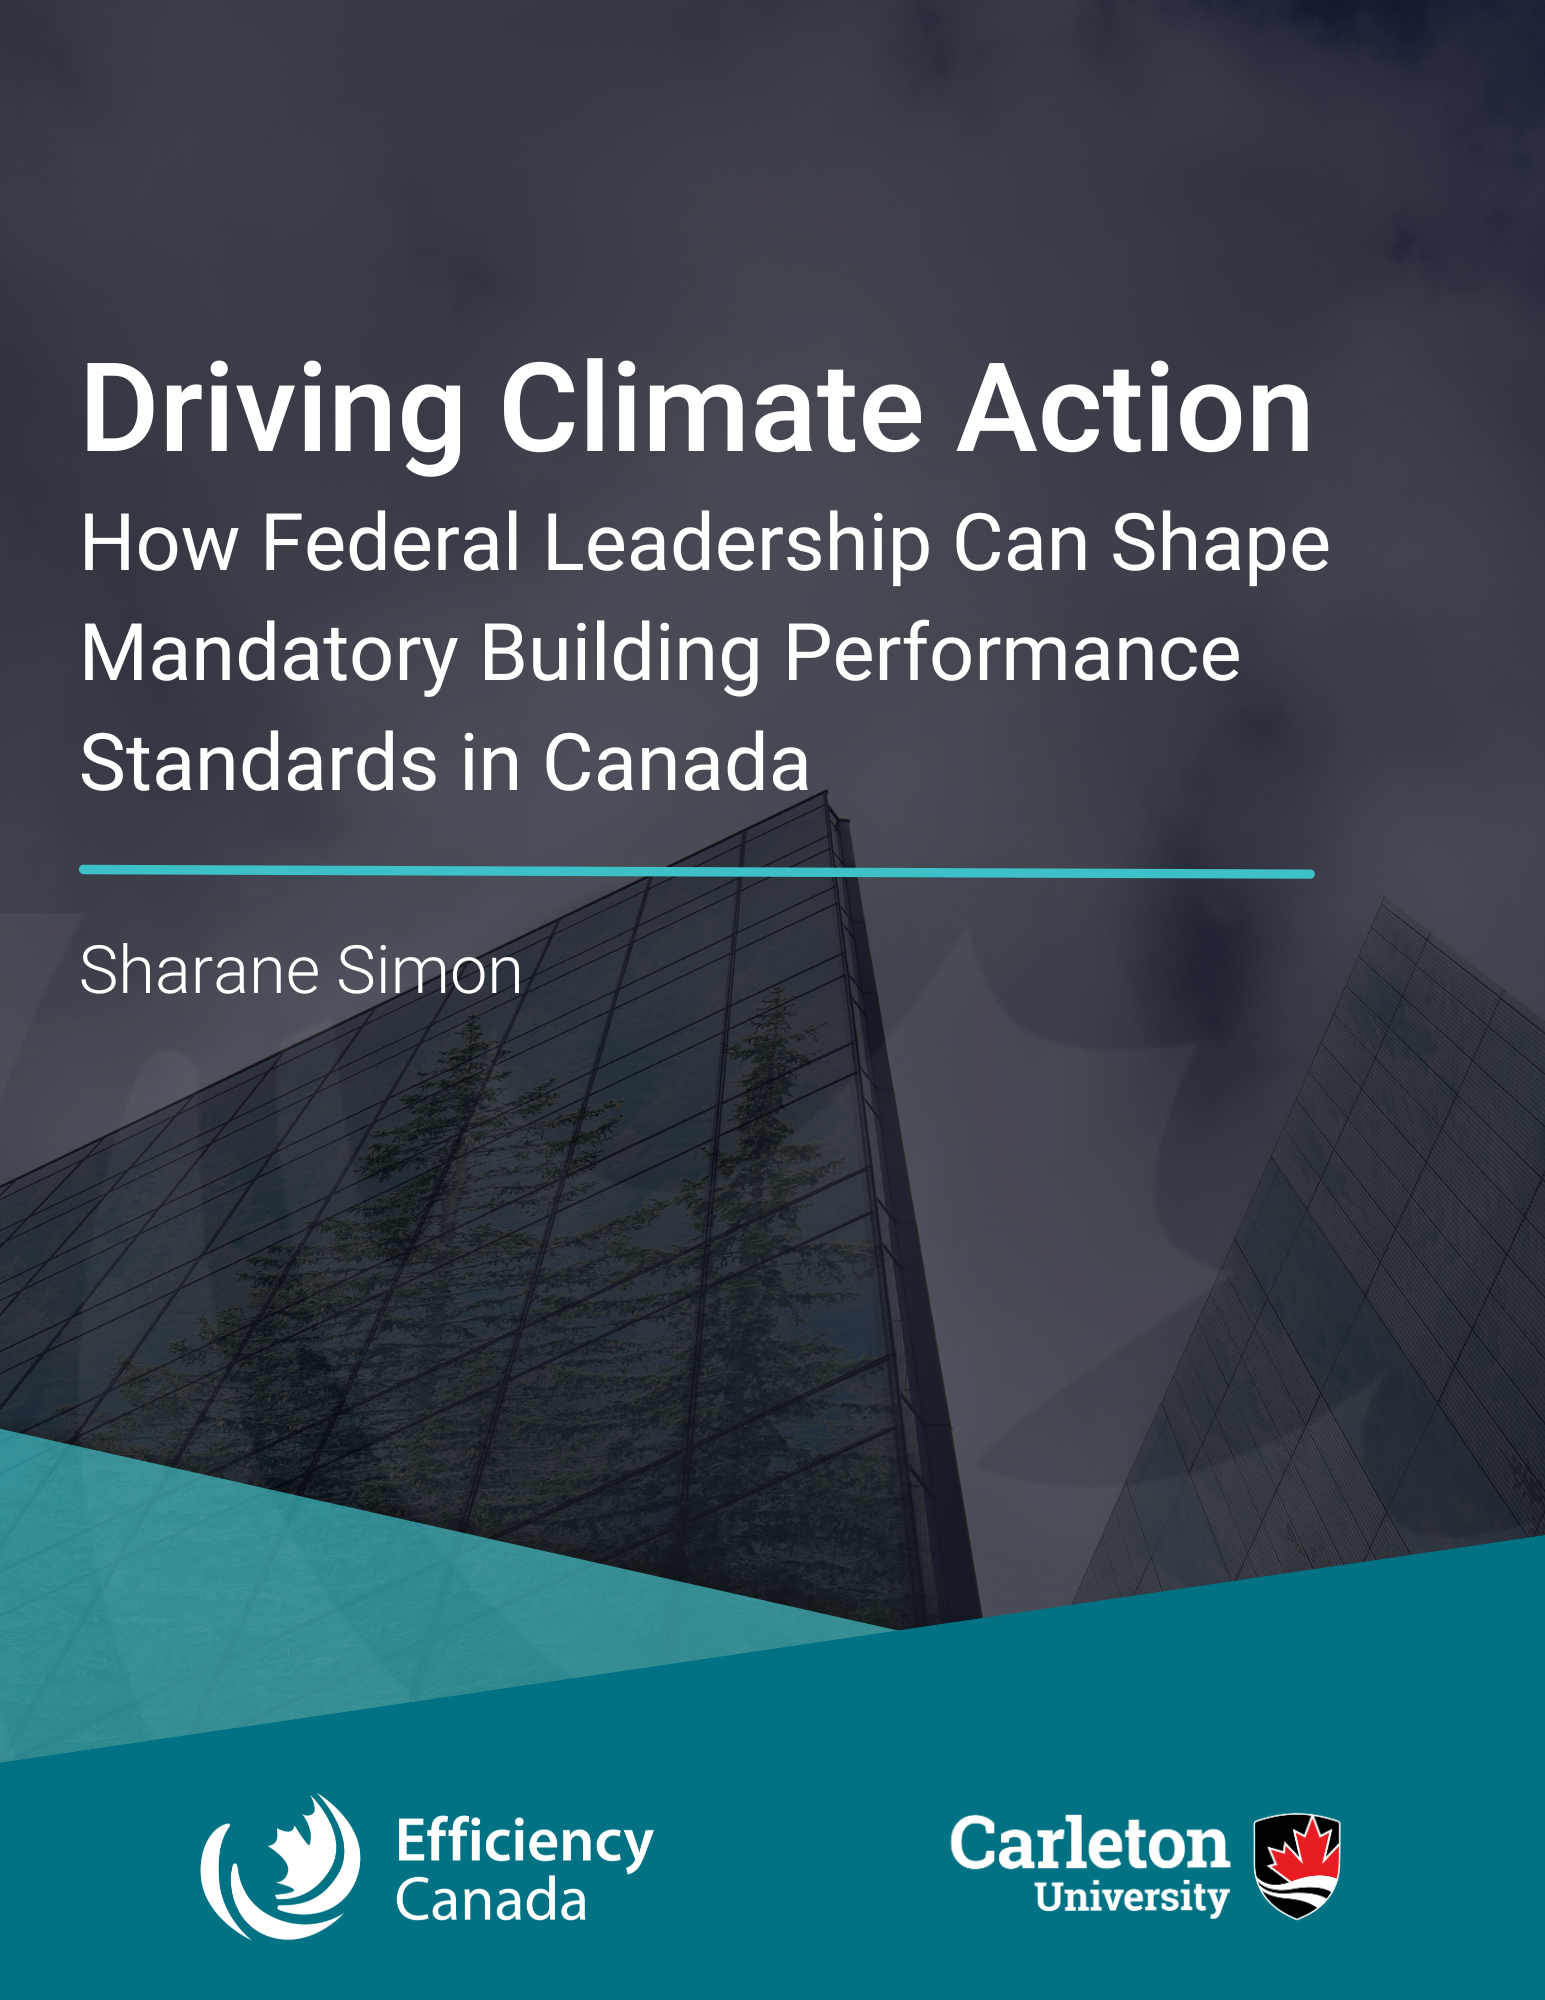 Driving Climate Action report cover